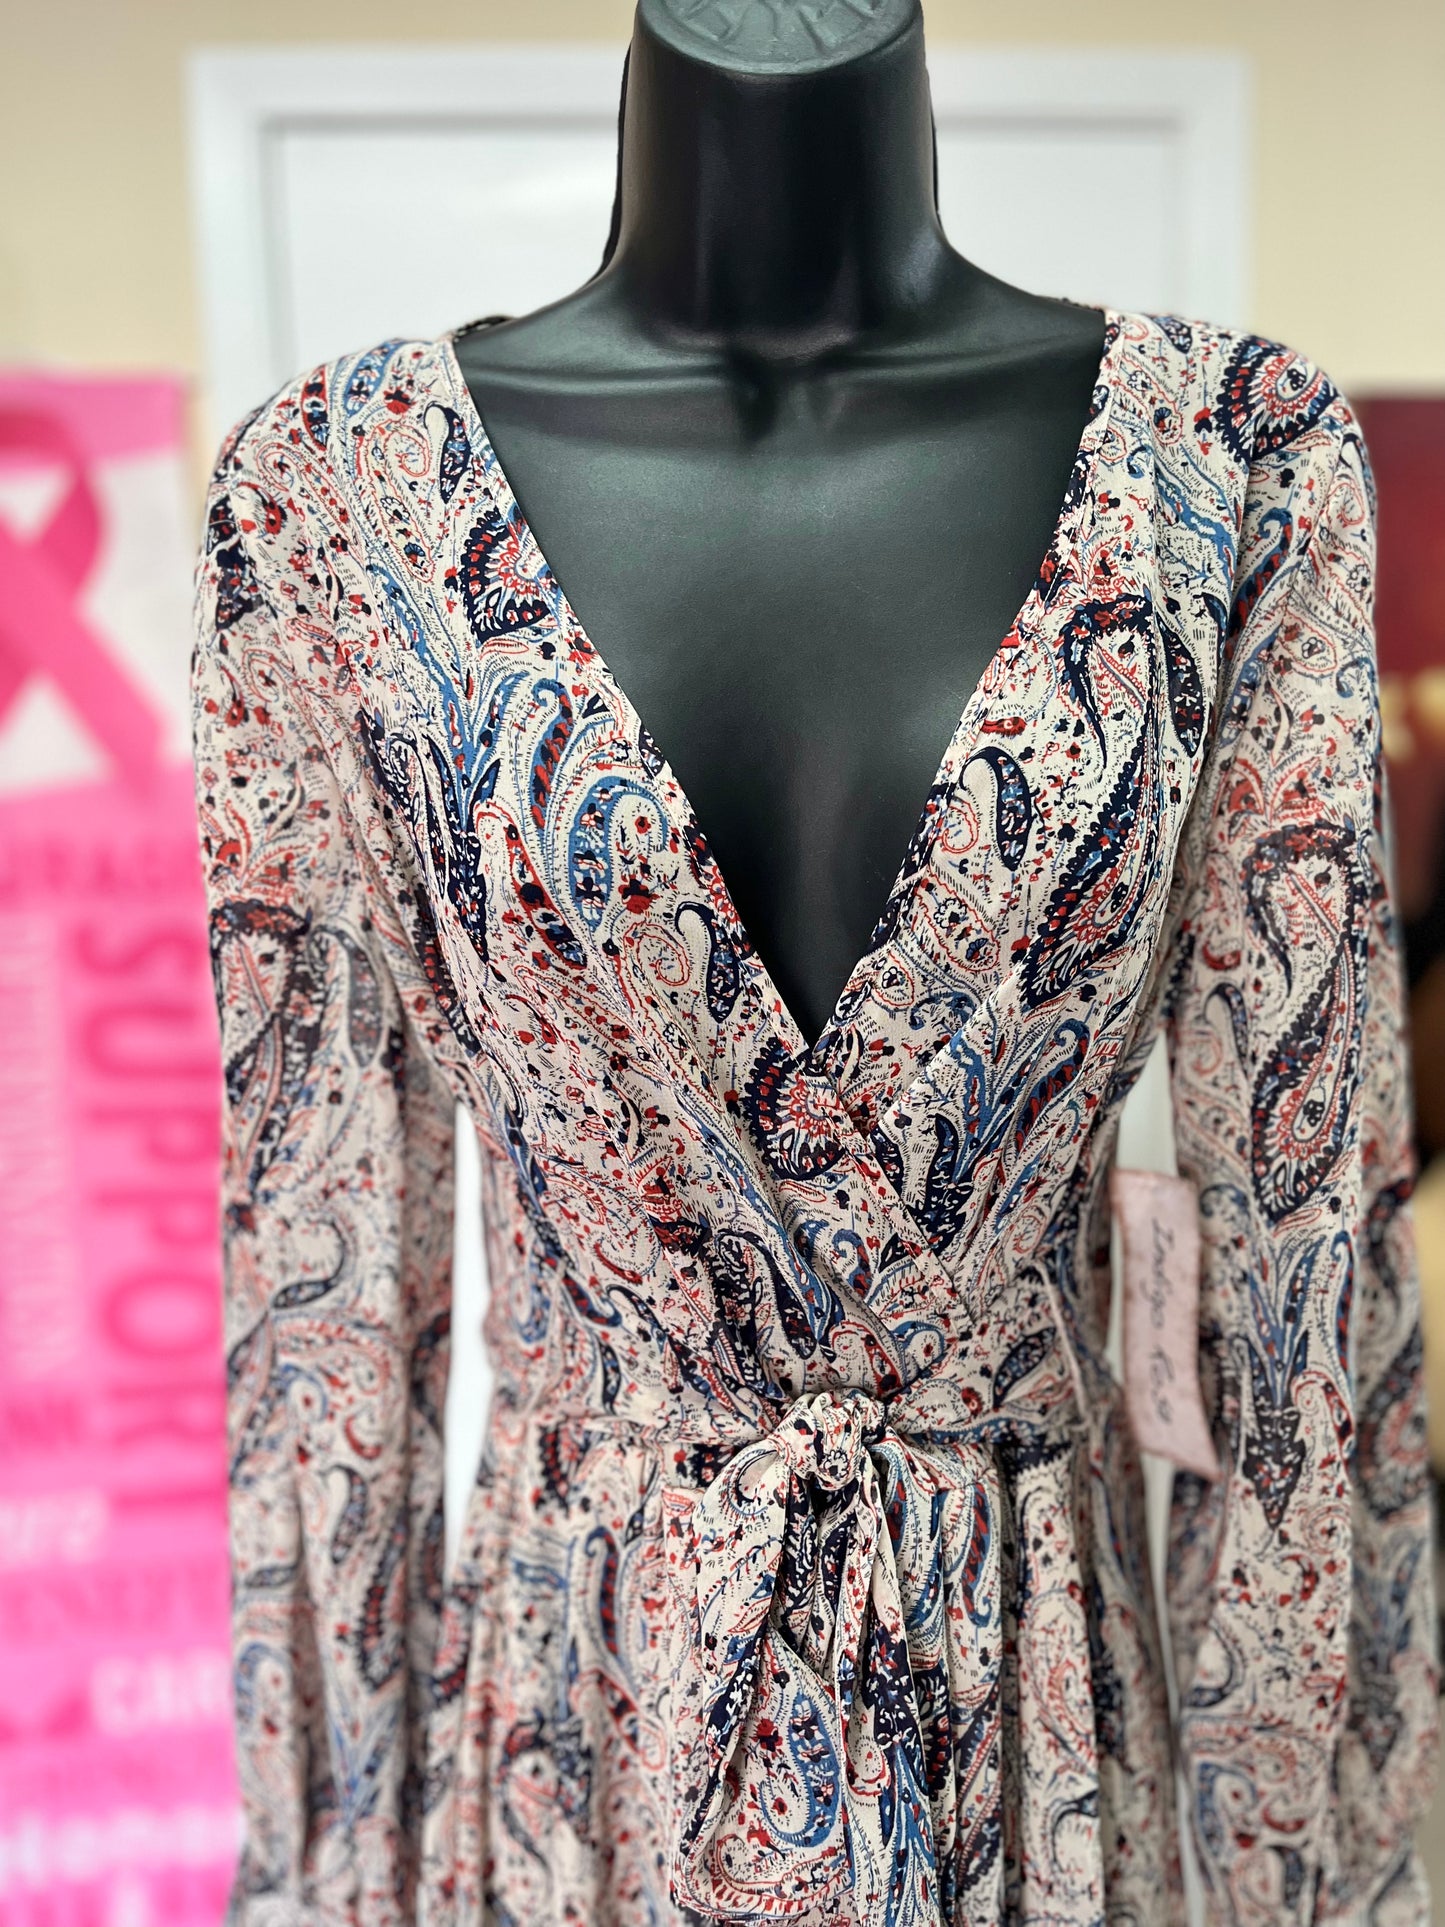 Luxurious Paisley Print Maxi Dress in Medium, perfect for any Boho Cottagecore look.